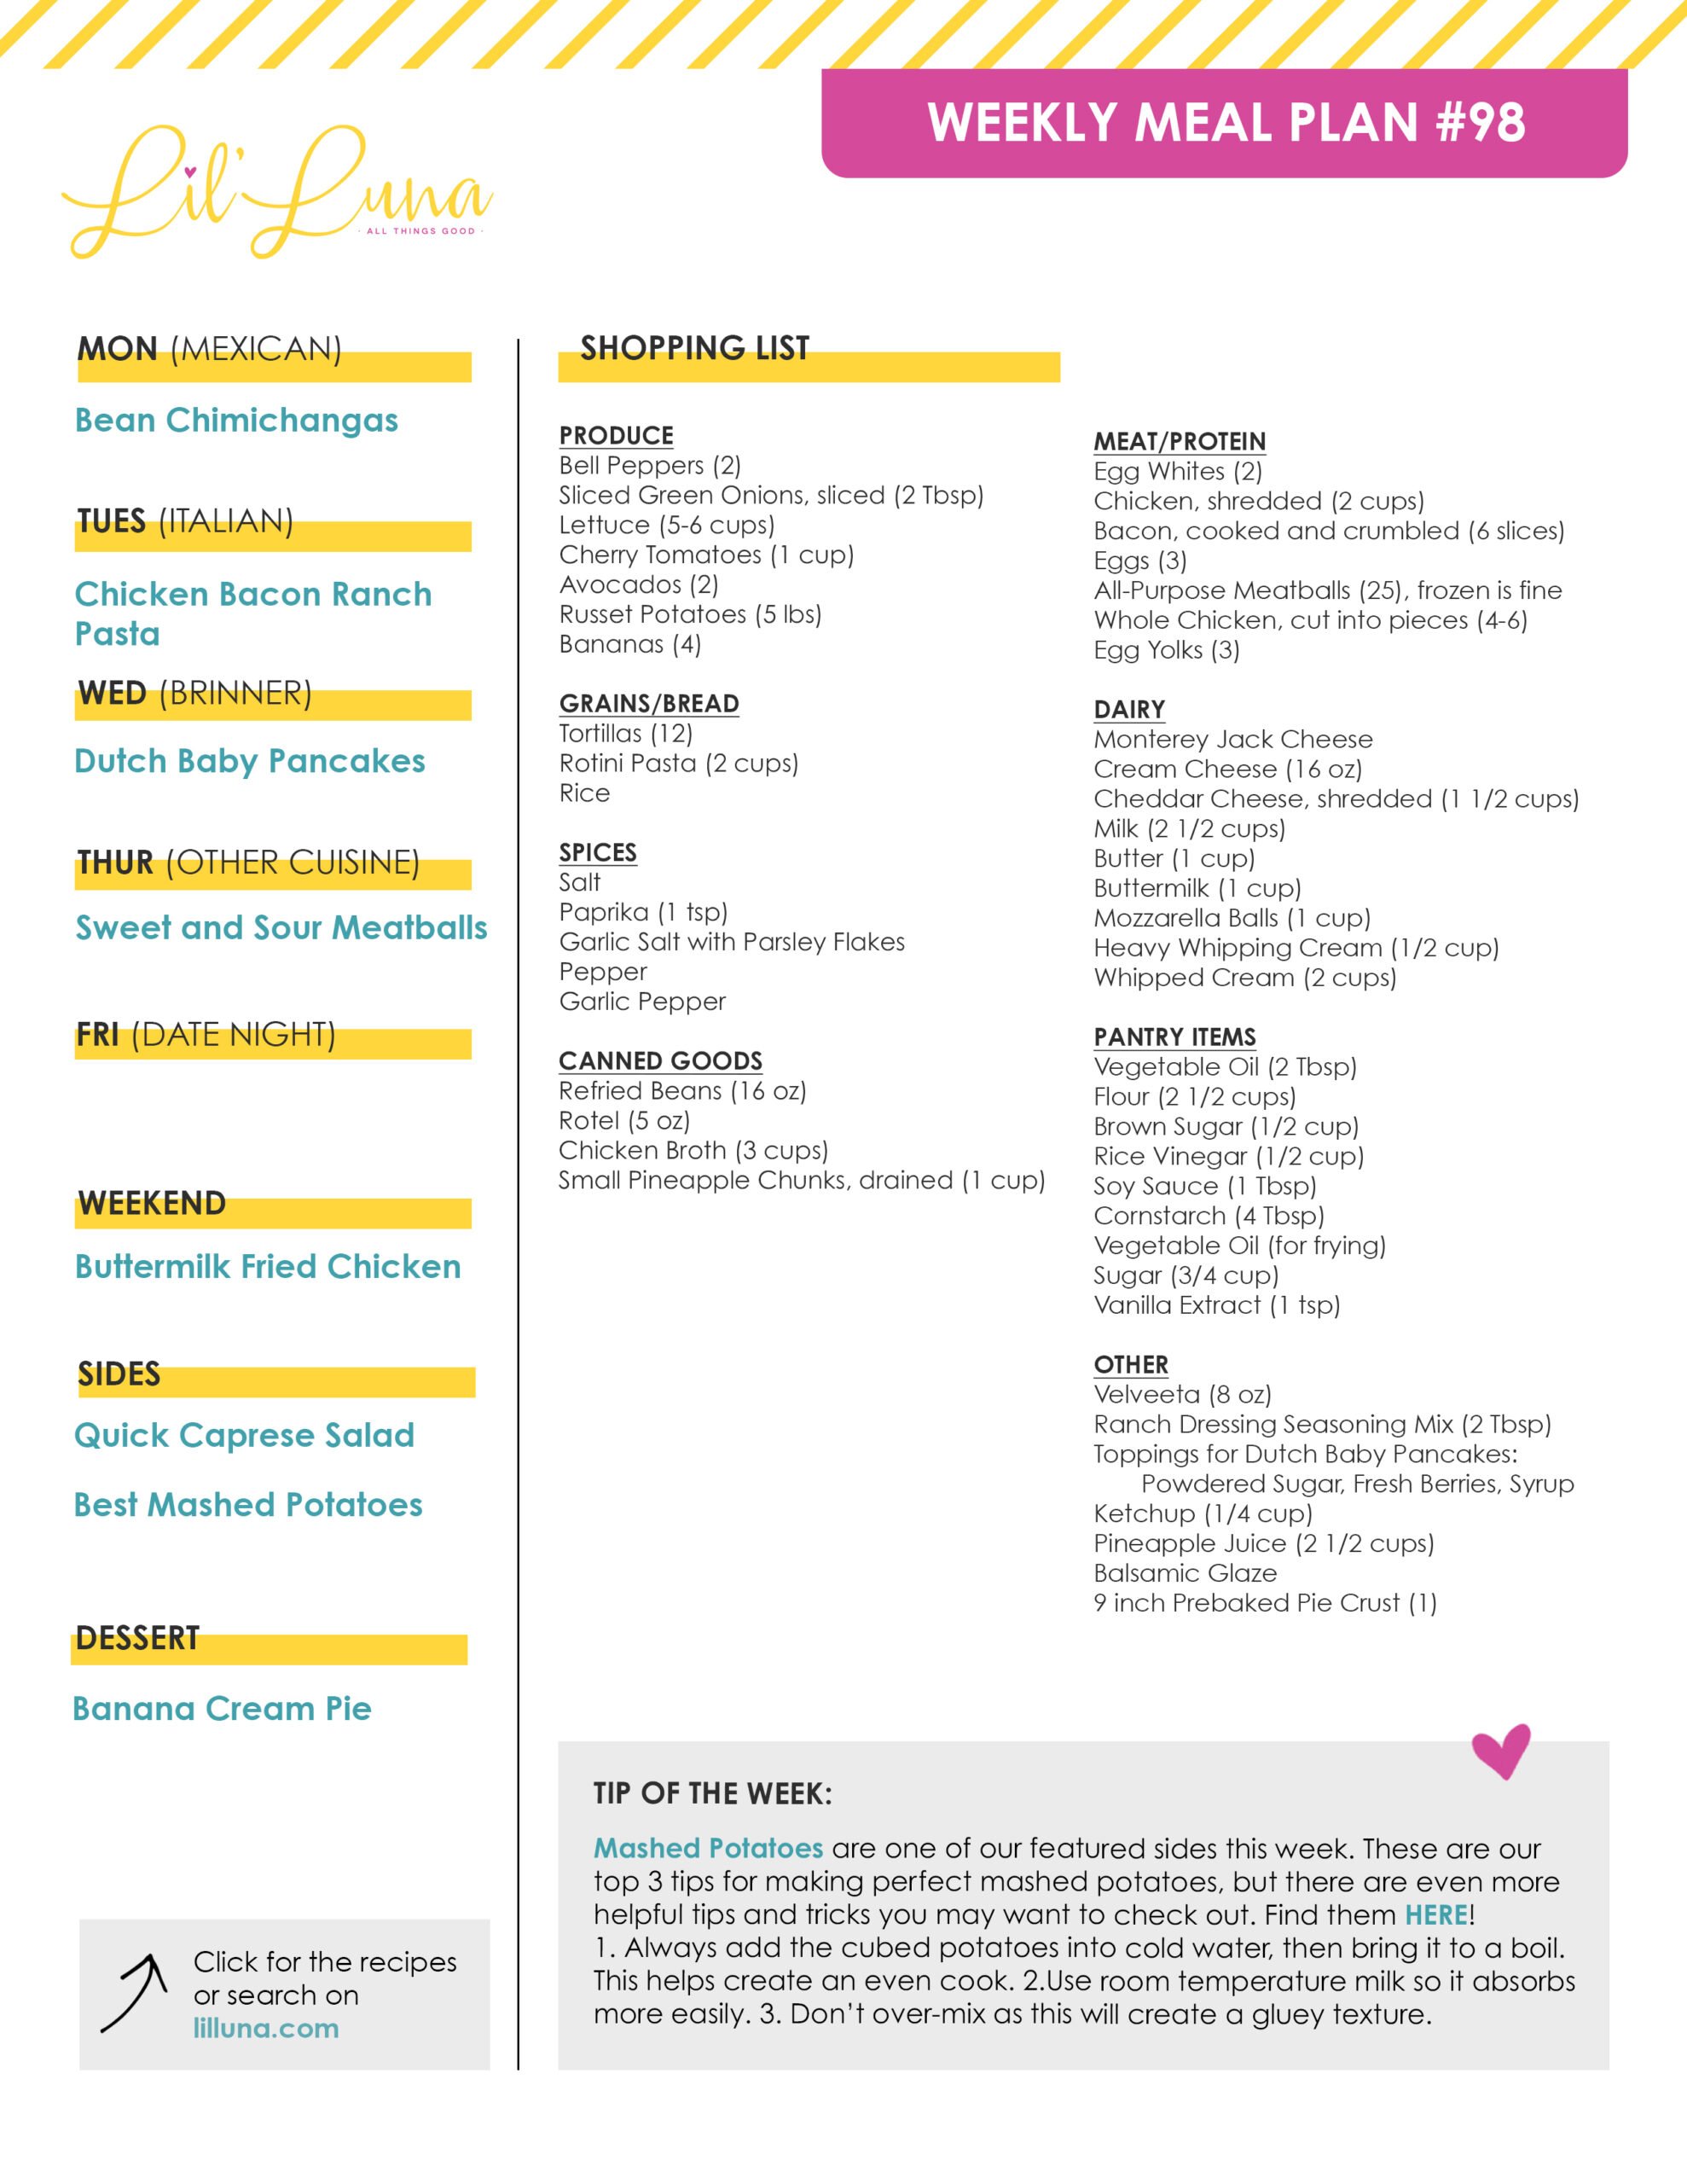 Printable version of Meal Plan #98 with grocery list.